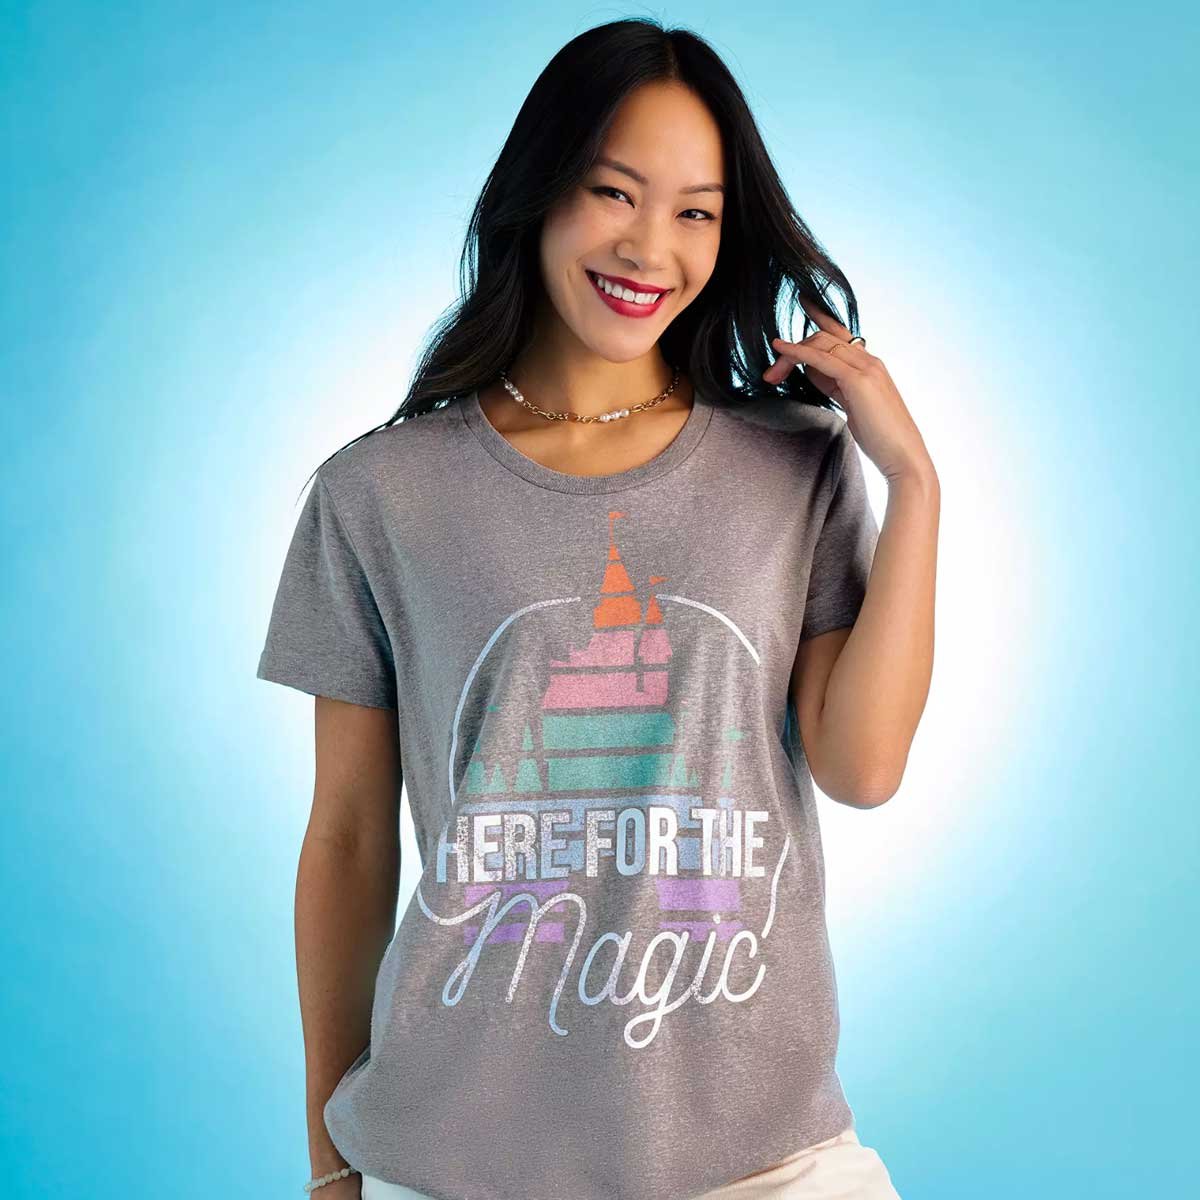 Here for the Magic Tshirt